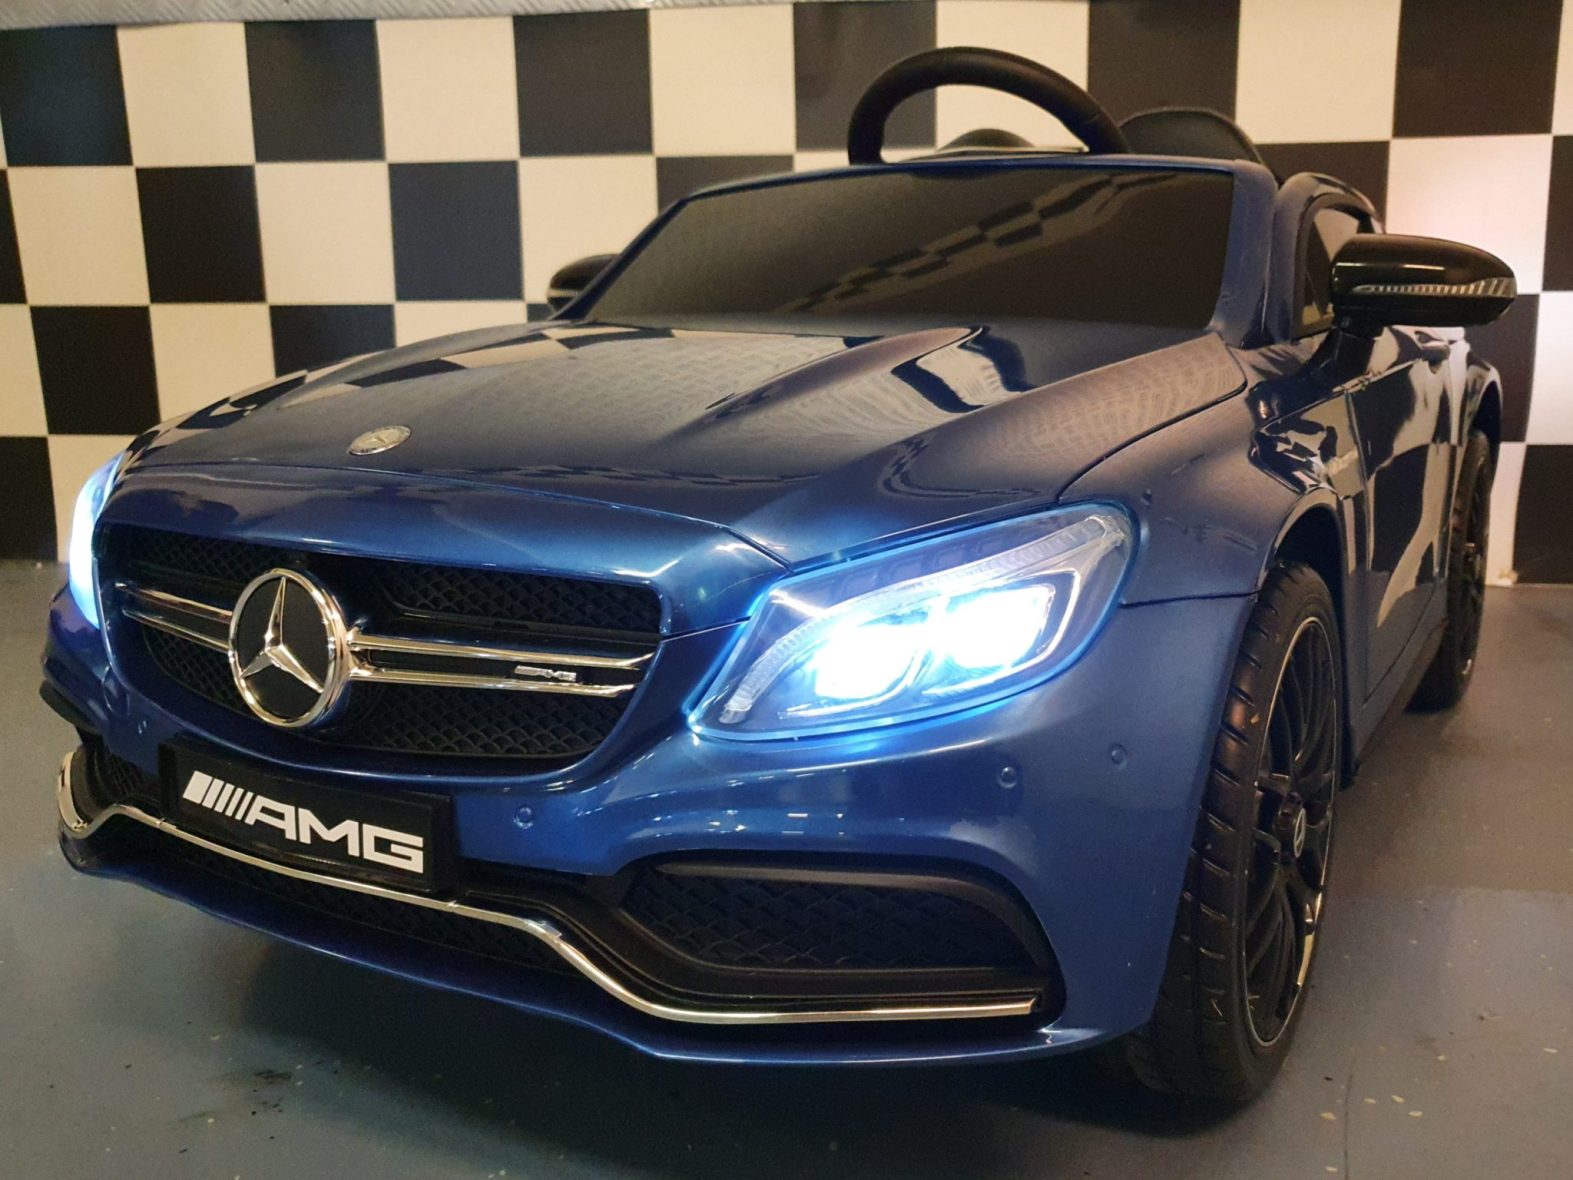 Electric Toy Car Mercedes C63 12 Volts with Remote Control Painting Blue